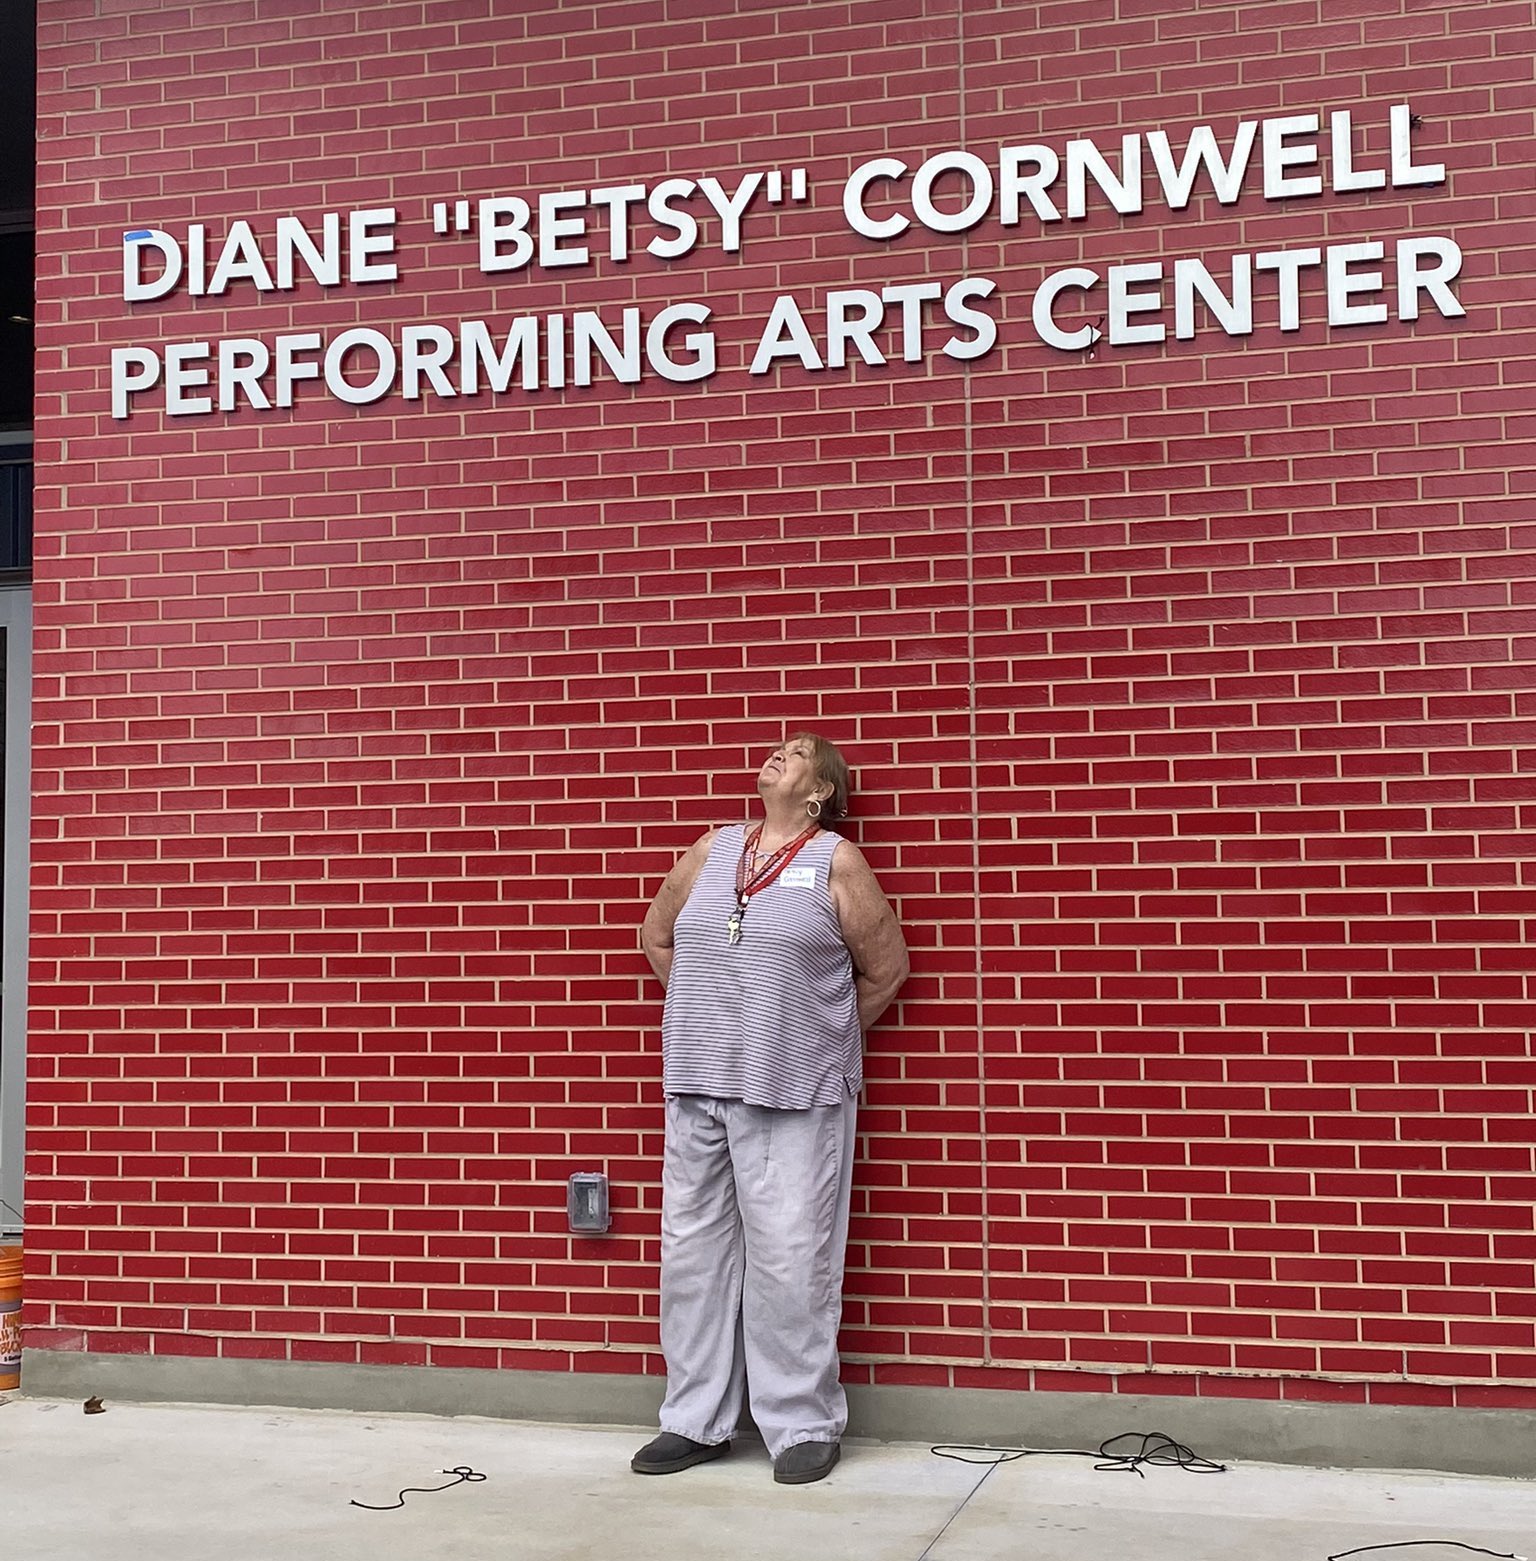 Former AISD theater teacher Diane "Betsy" Cornwell in front of a performing arts center named after her